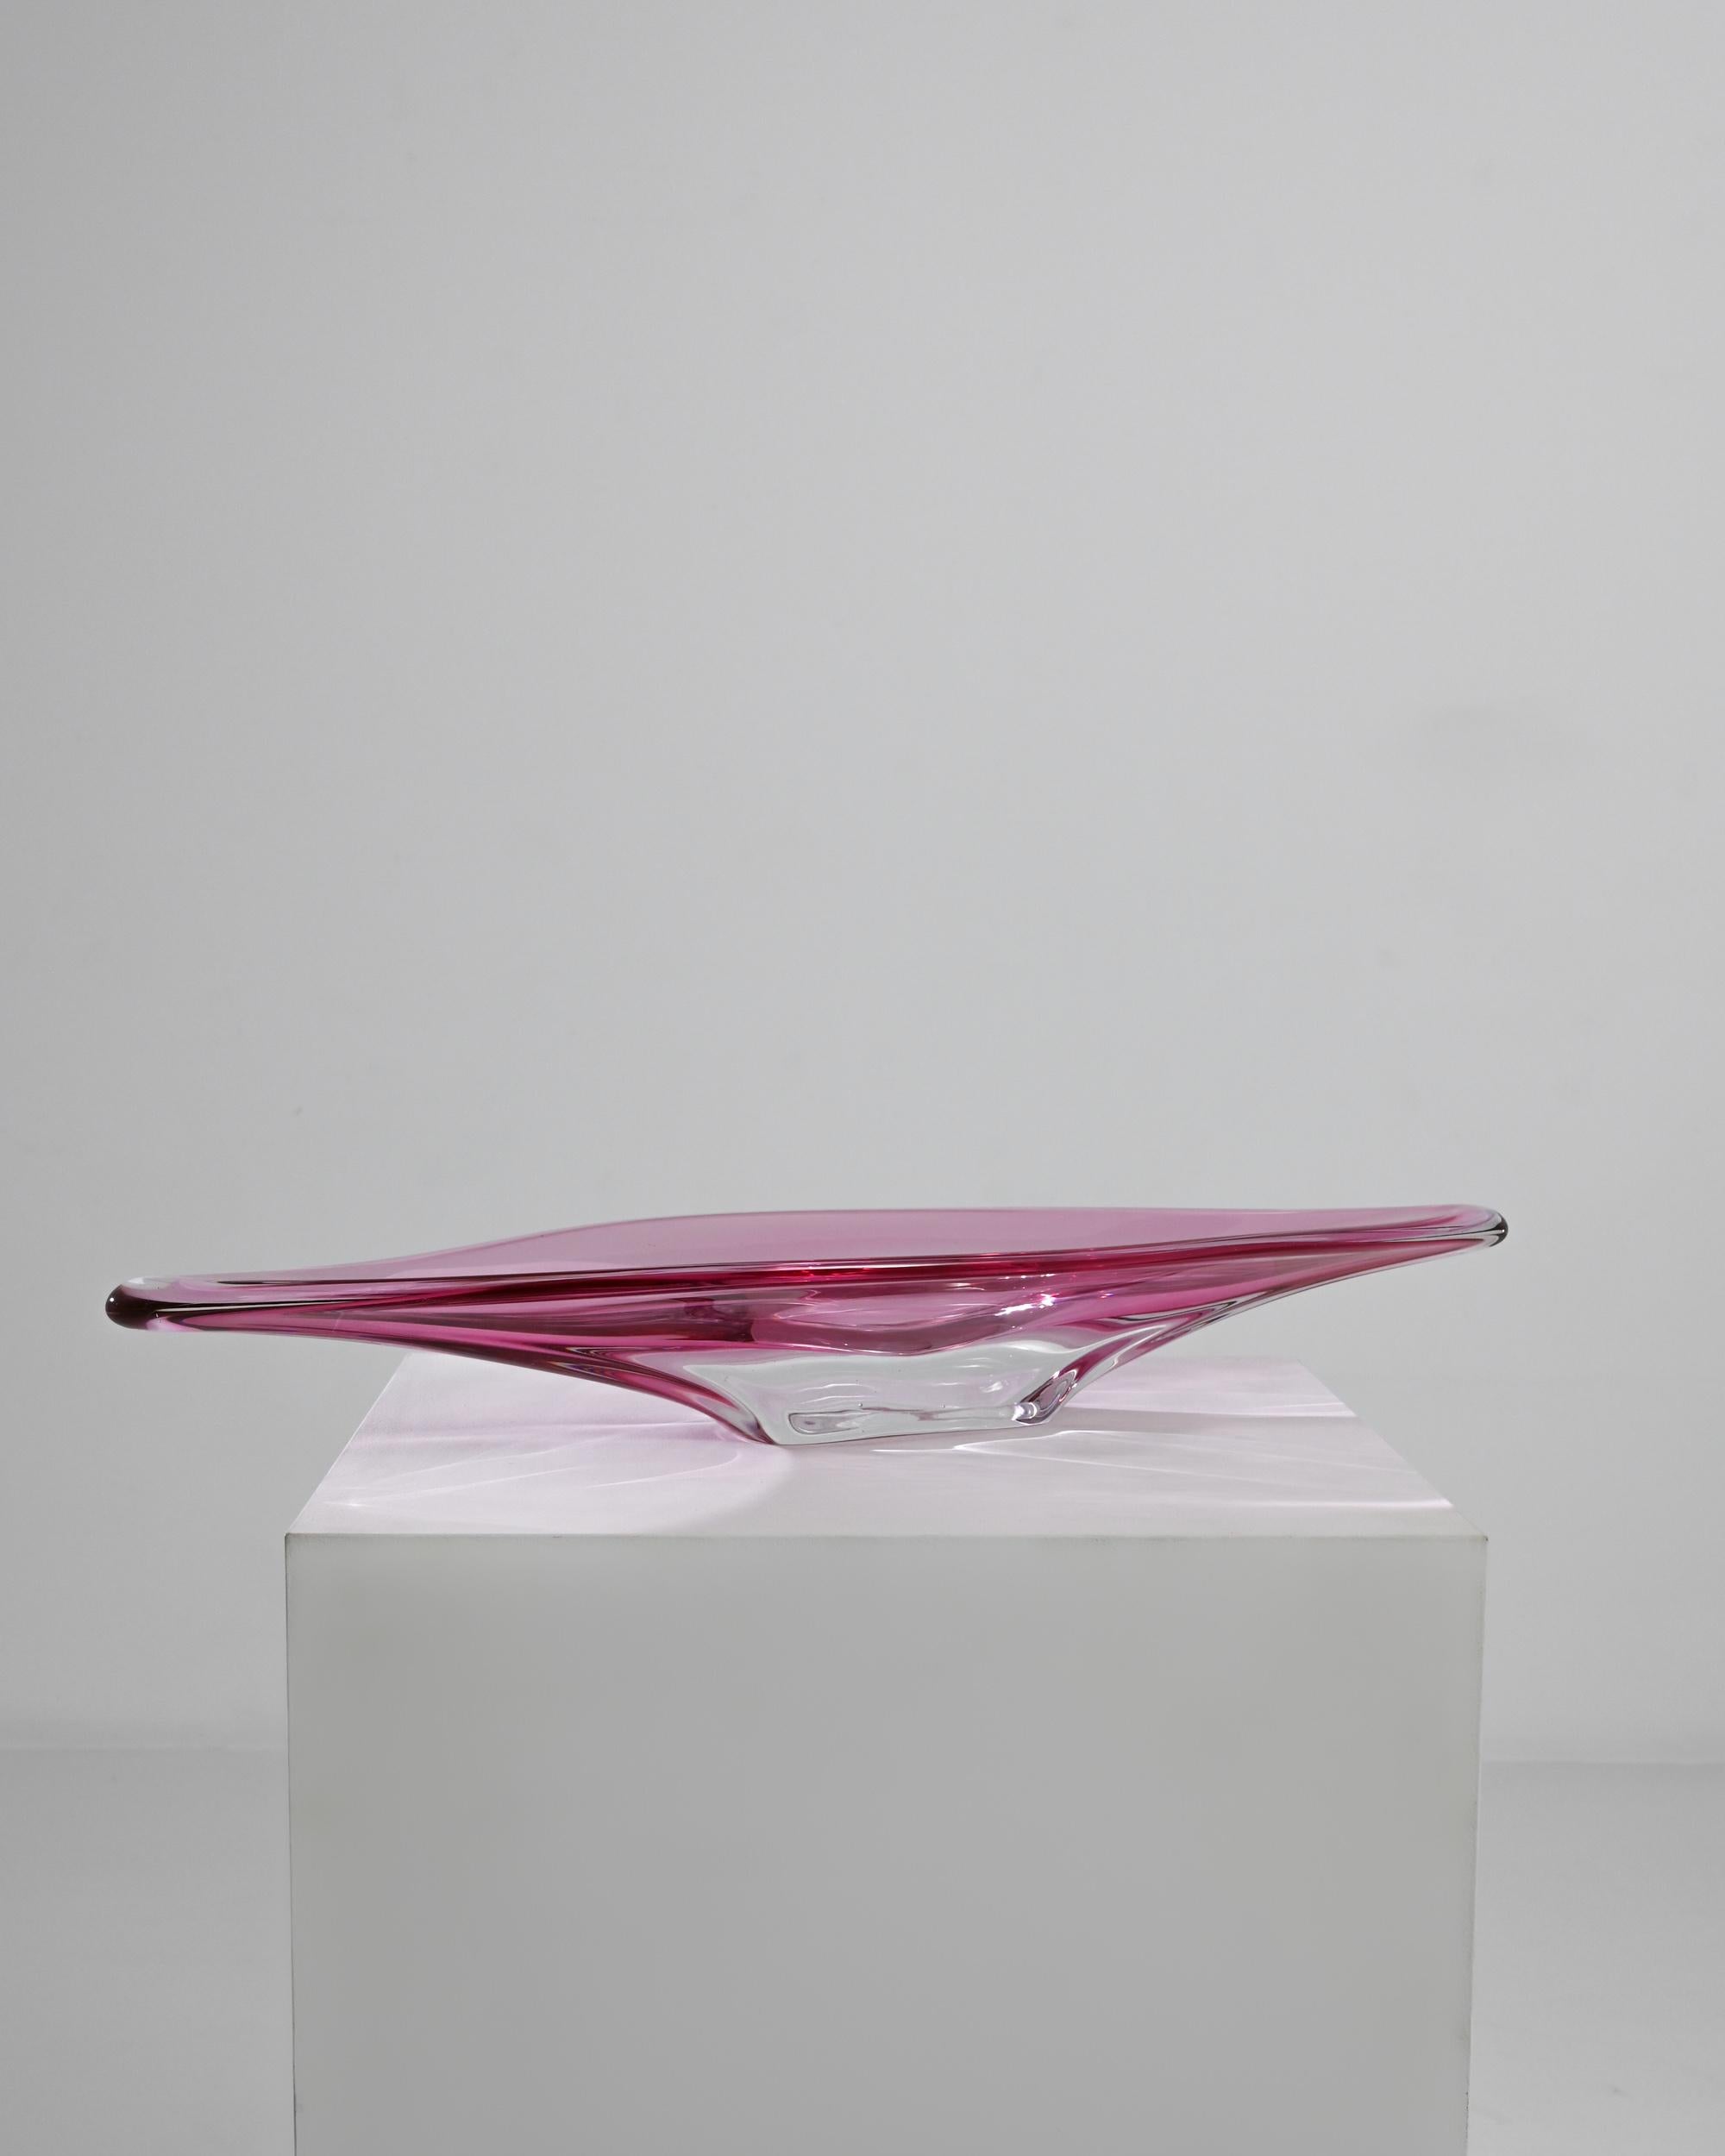 The liquid lines of this glass plateau make for an elegant decorative accent. Made in Belgium in the 20th Century, the mastery required to make this artisan glasswork is visible in the elongated symmetry of the form and the skillful color gradient,